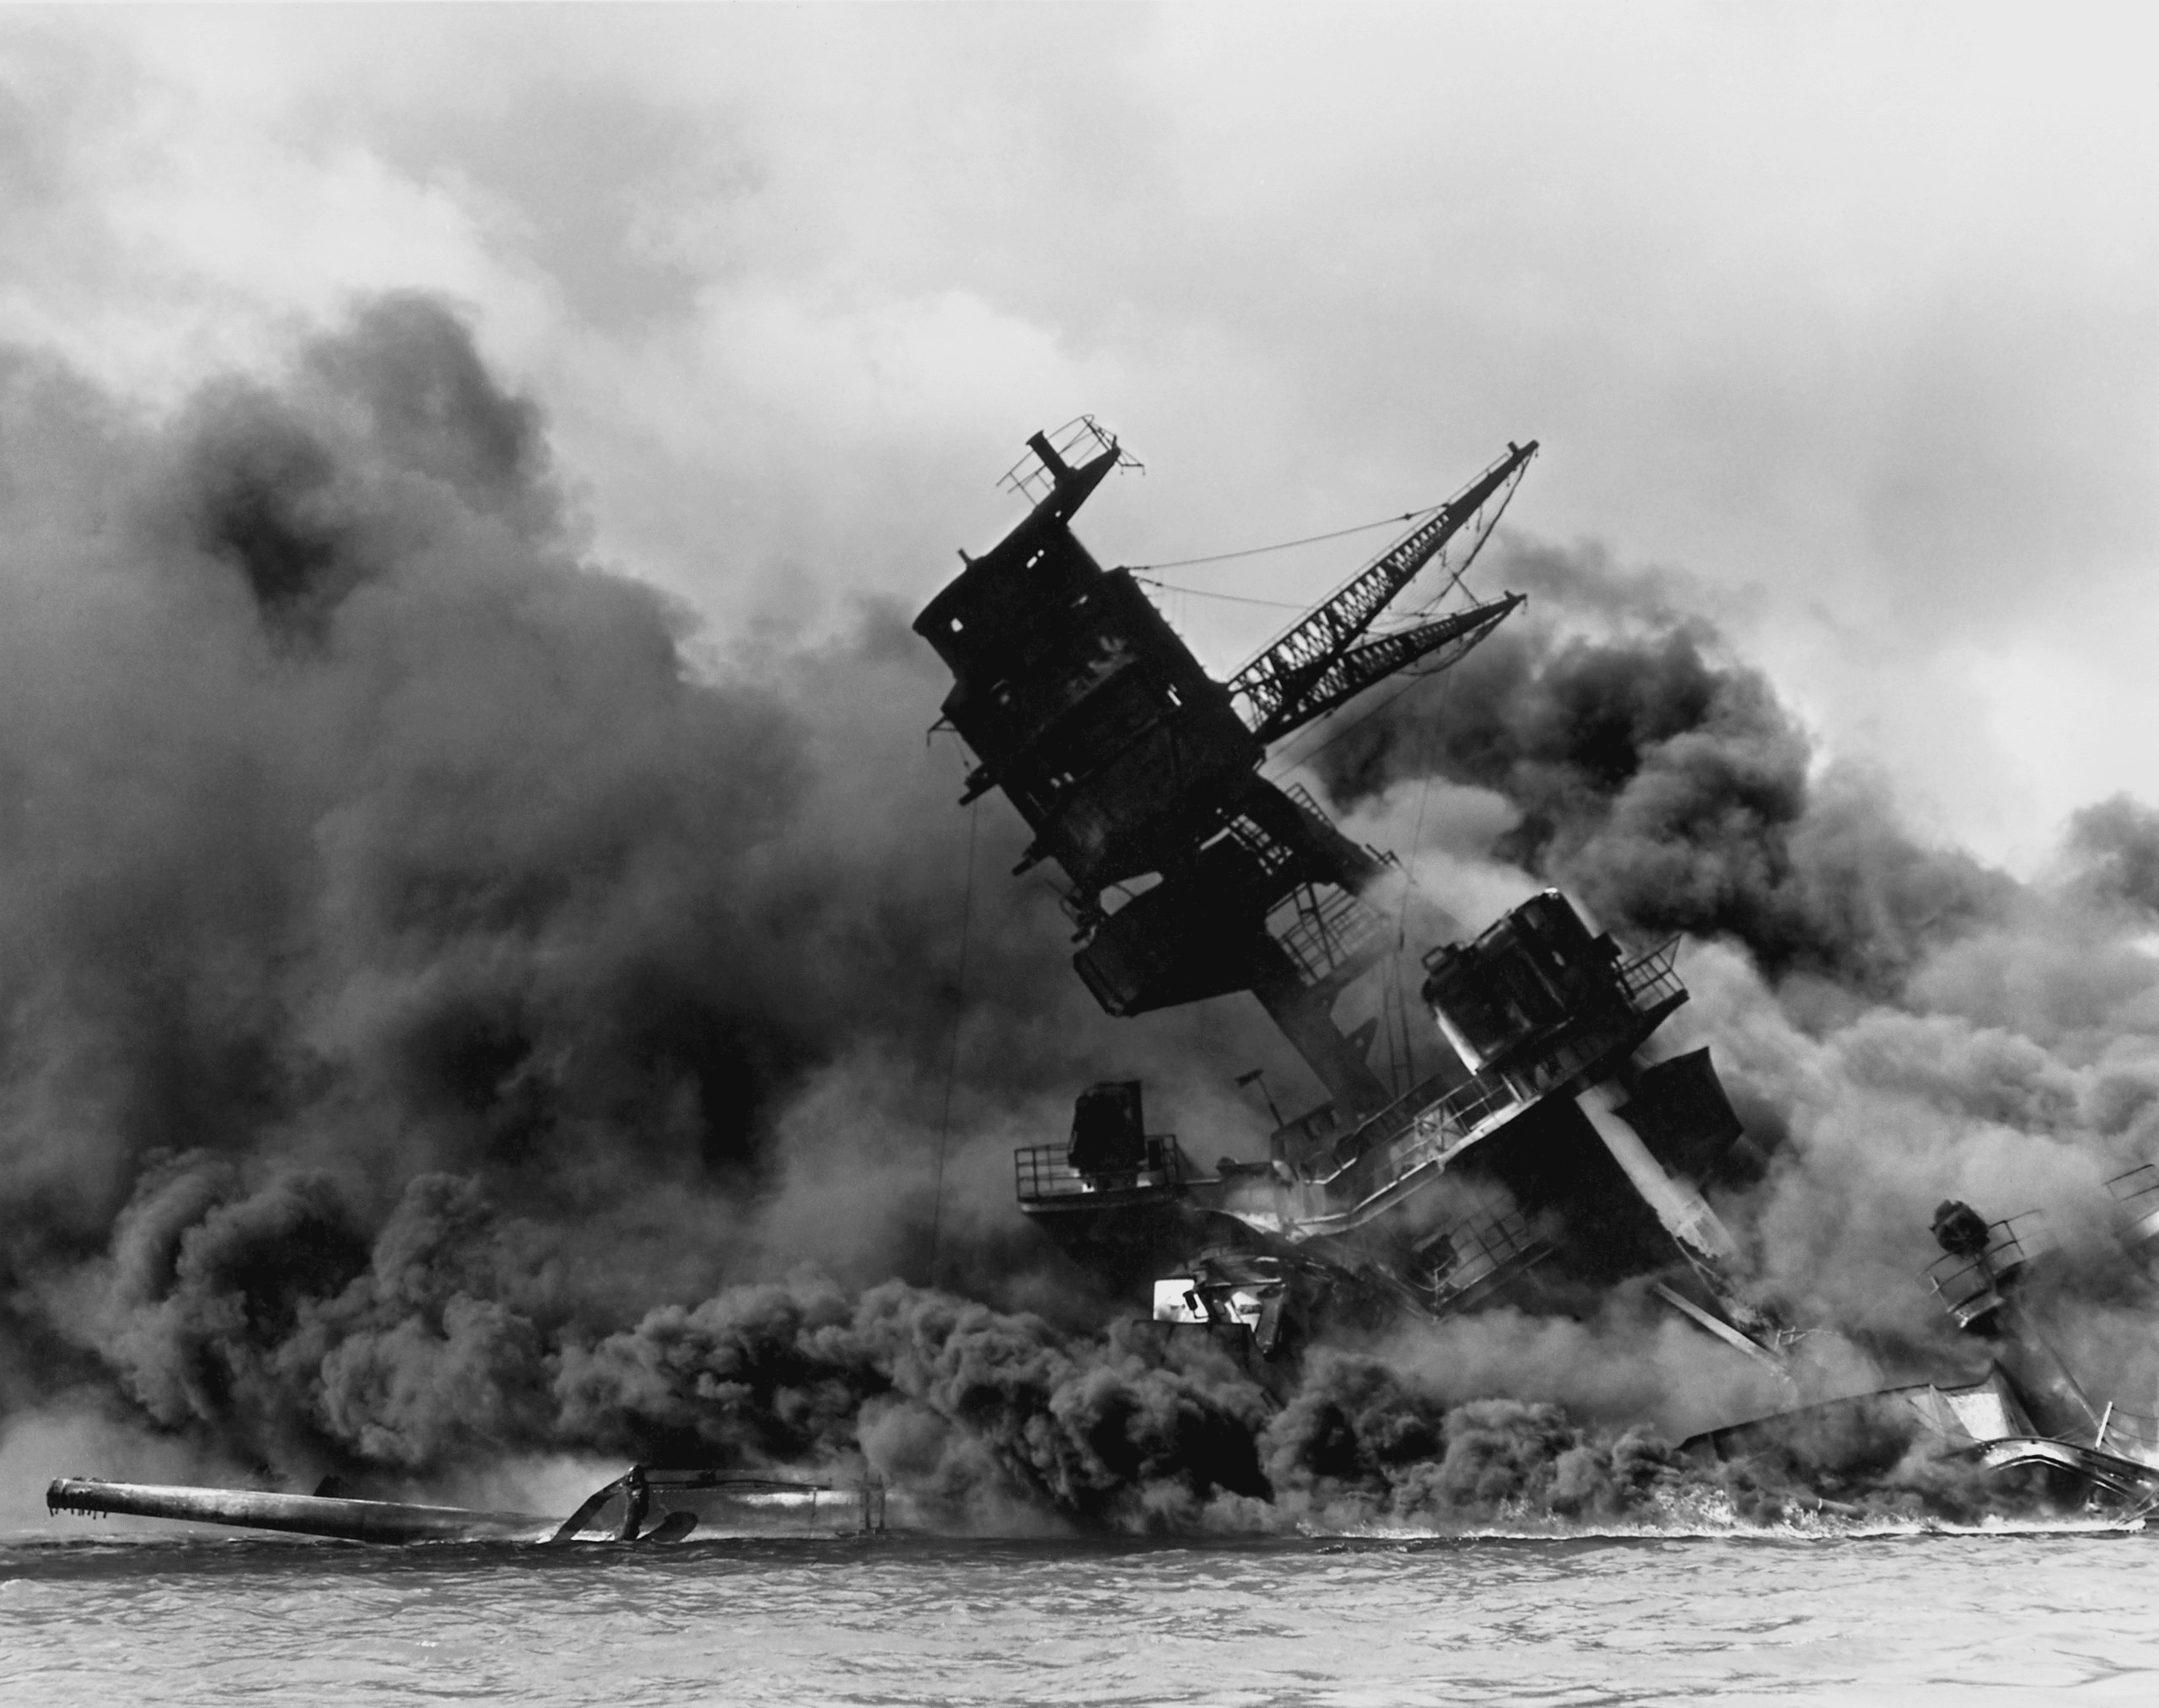 The USS Arizona (BB-39) burning after the Japanese attack on Pearl Harbor, 7 December 1941